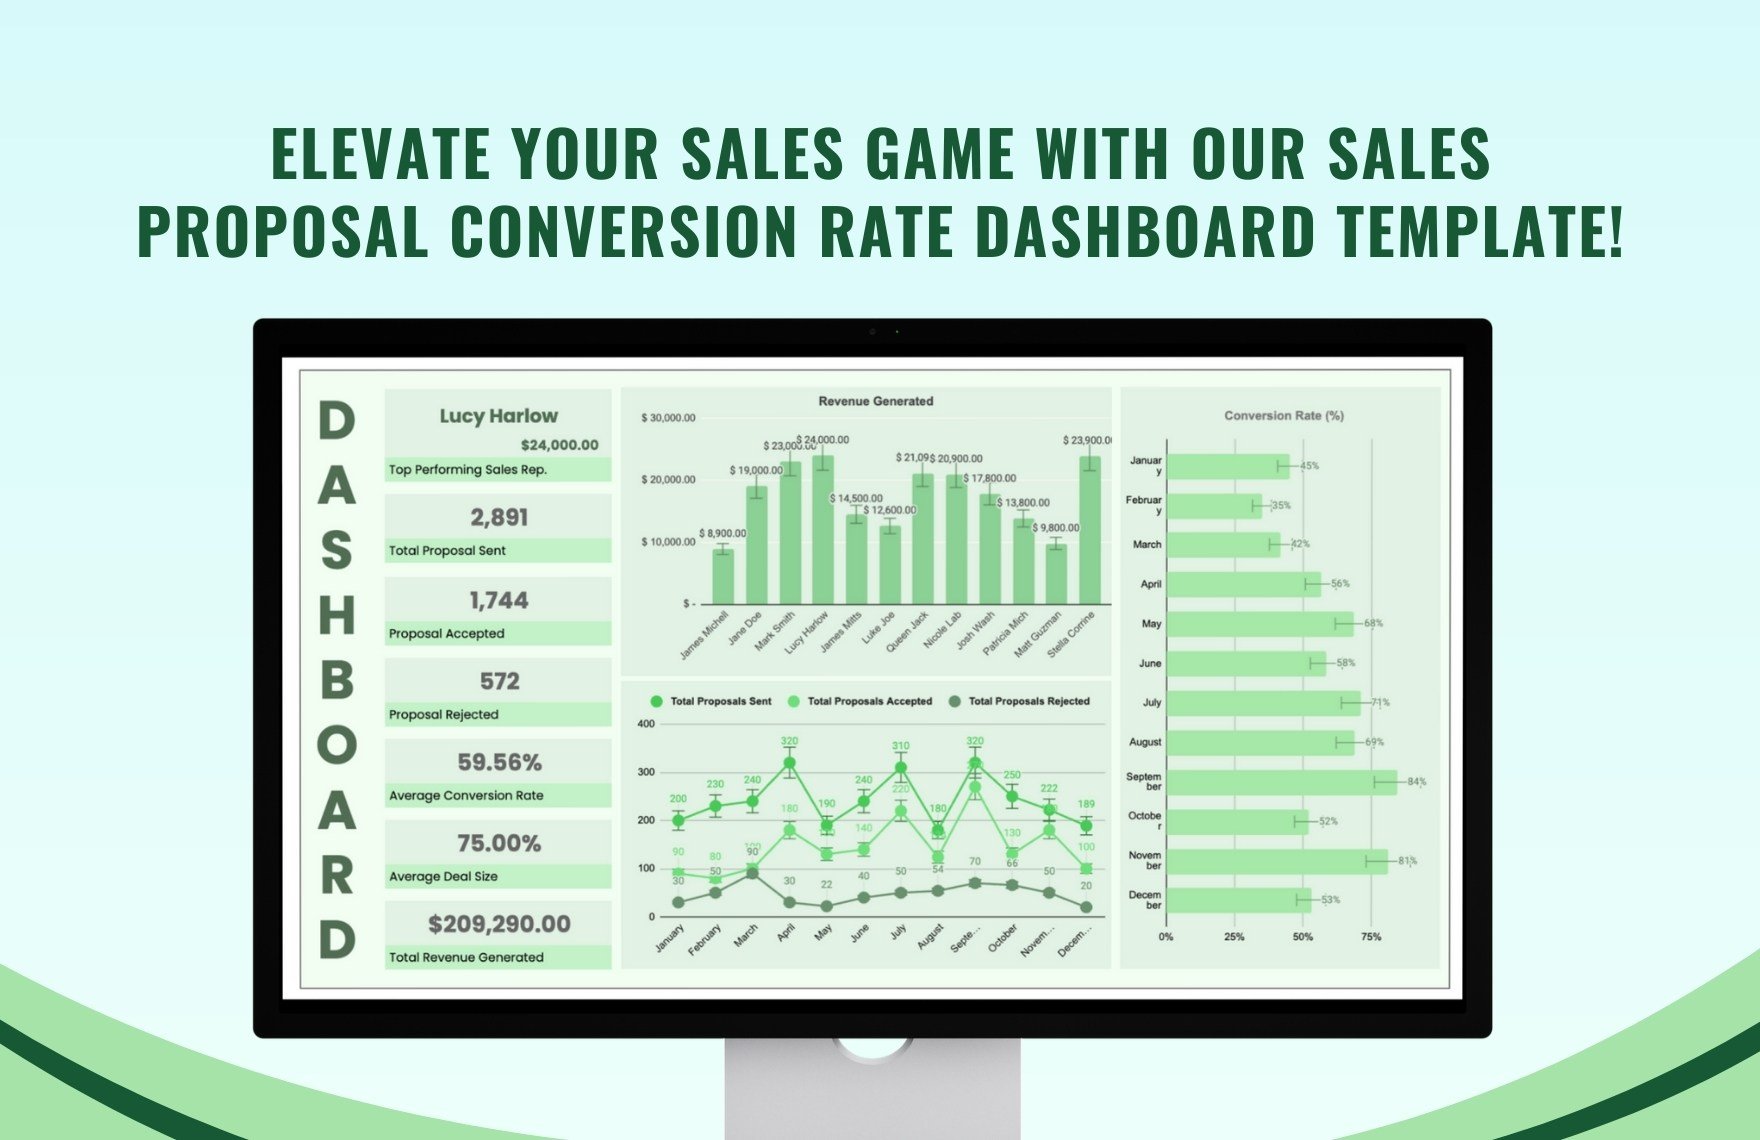 Sales Proposal Conversion Rate Dashboard Template